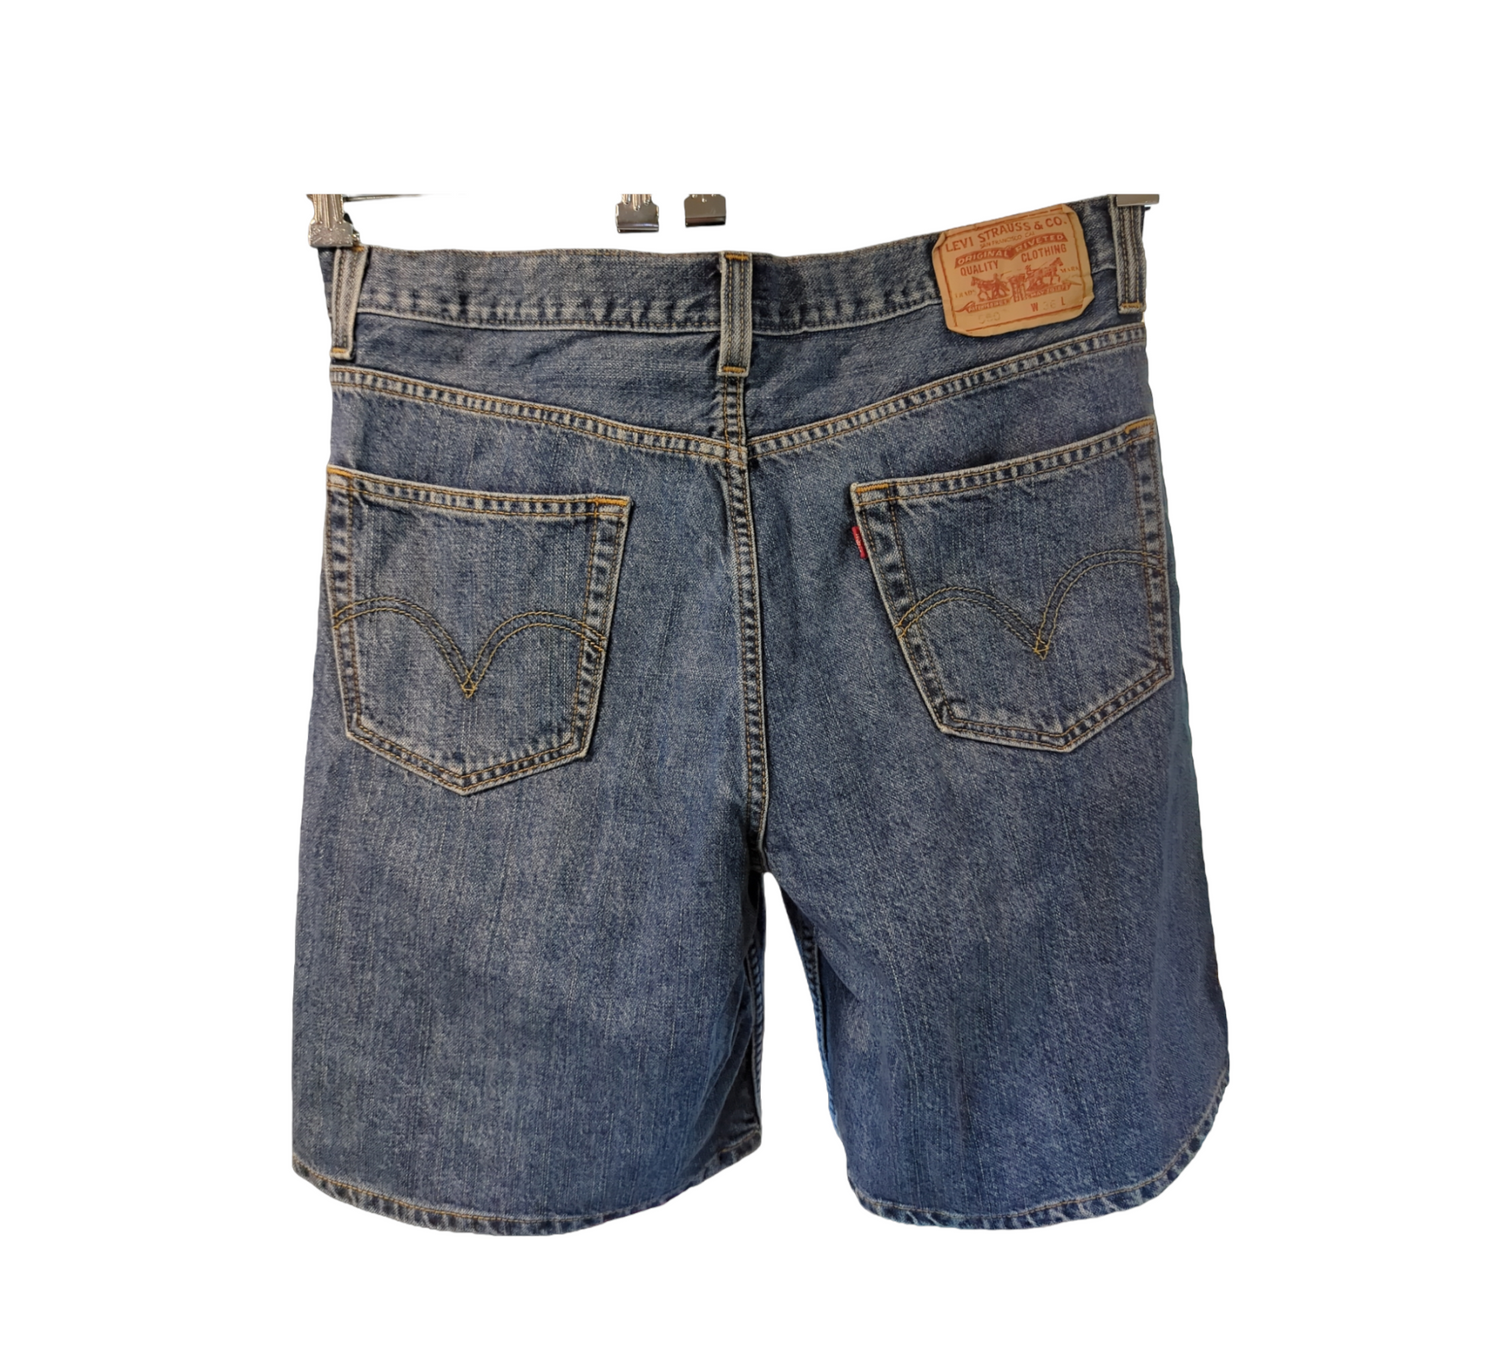 Levi's 550 Relaxed Fit Bermuda Shorts Size 36 | Popular brands used clothing